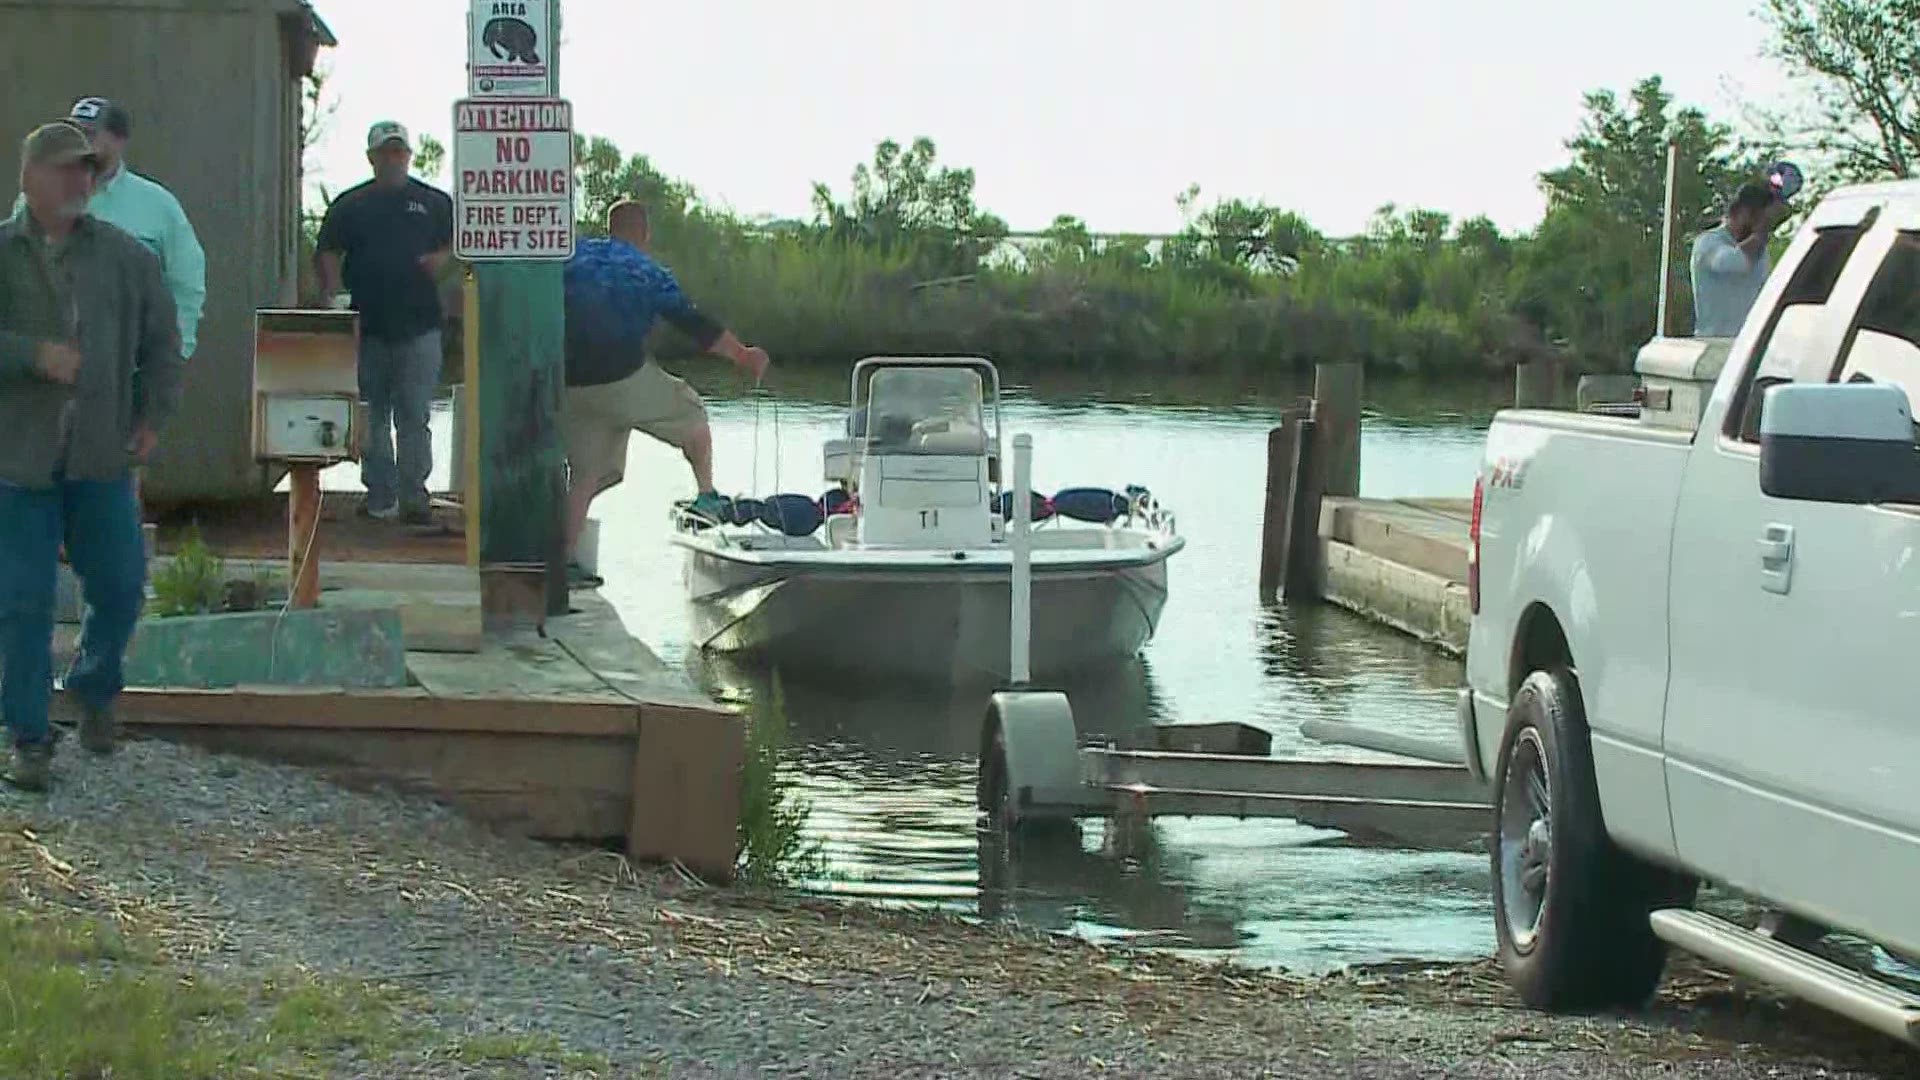 The Cajun Navy and other volunteers in airboats and other small boats, continue searching for 7 crew members who have been missing since the Seacor incident.